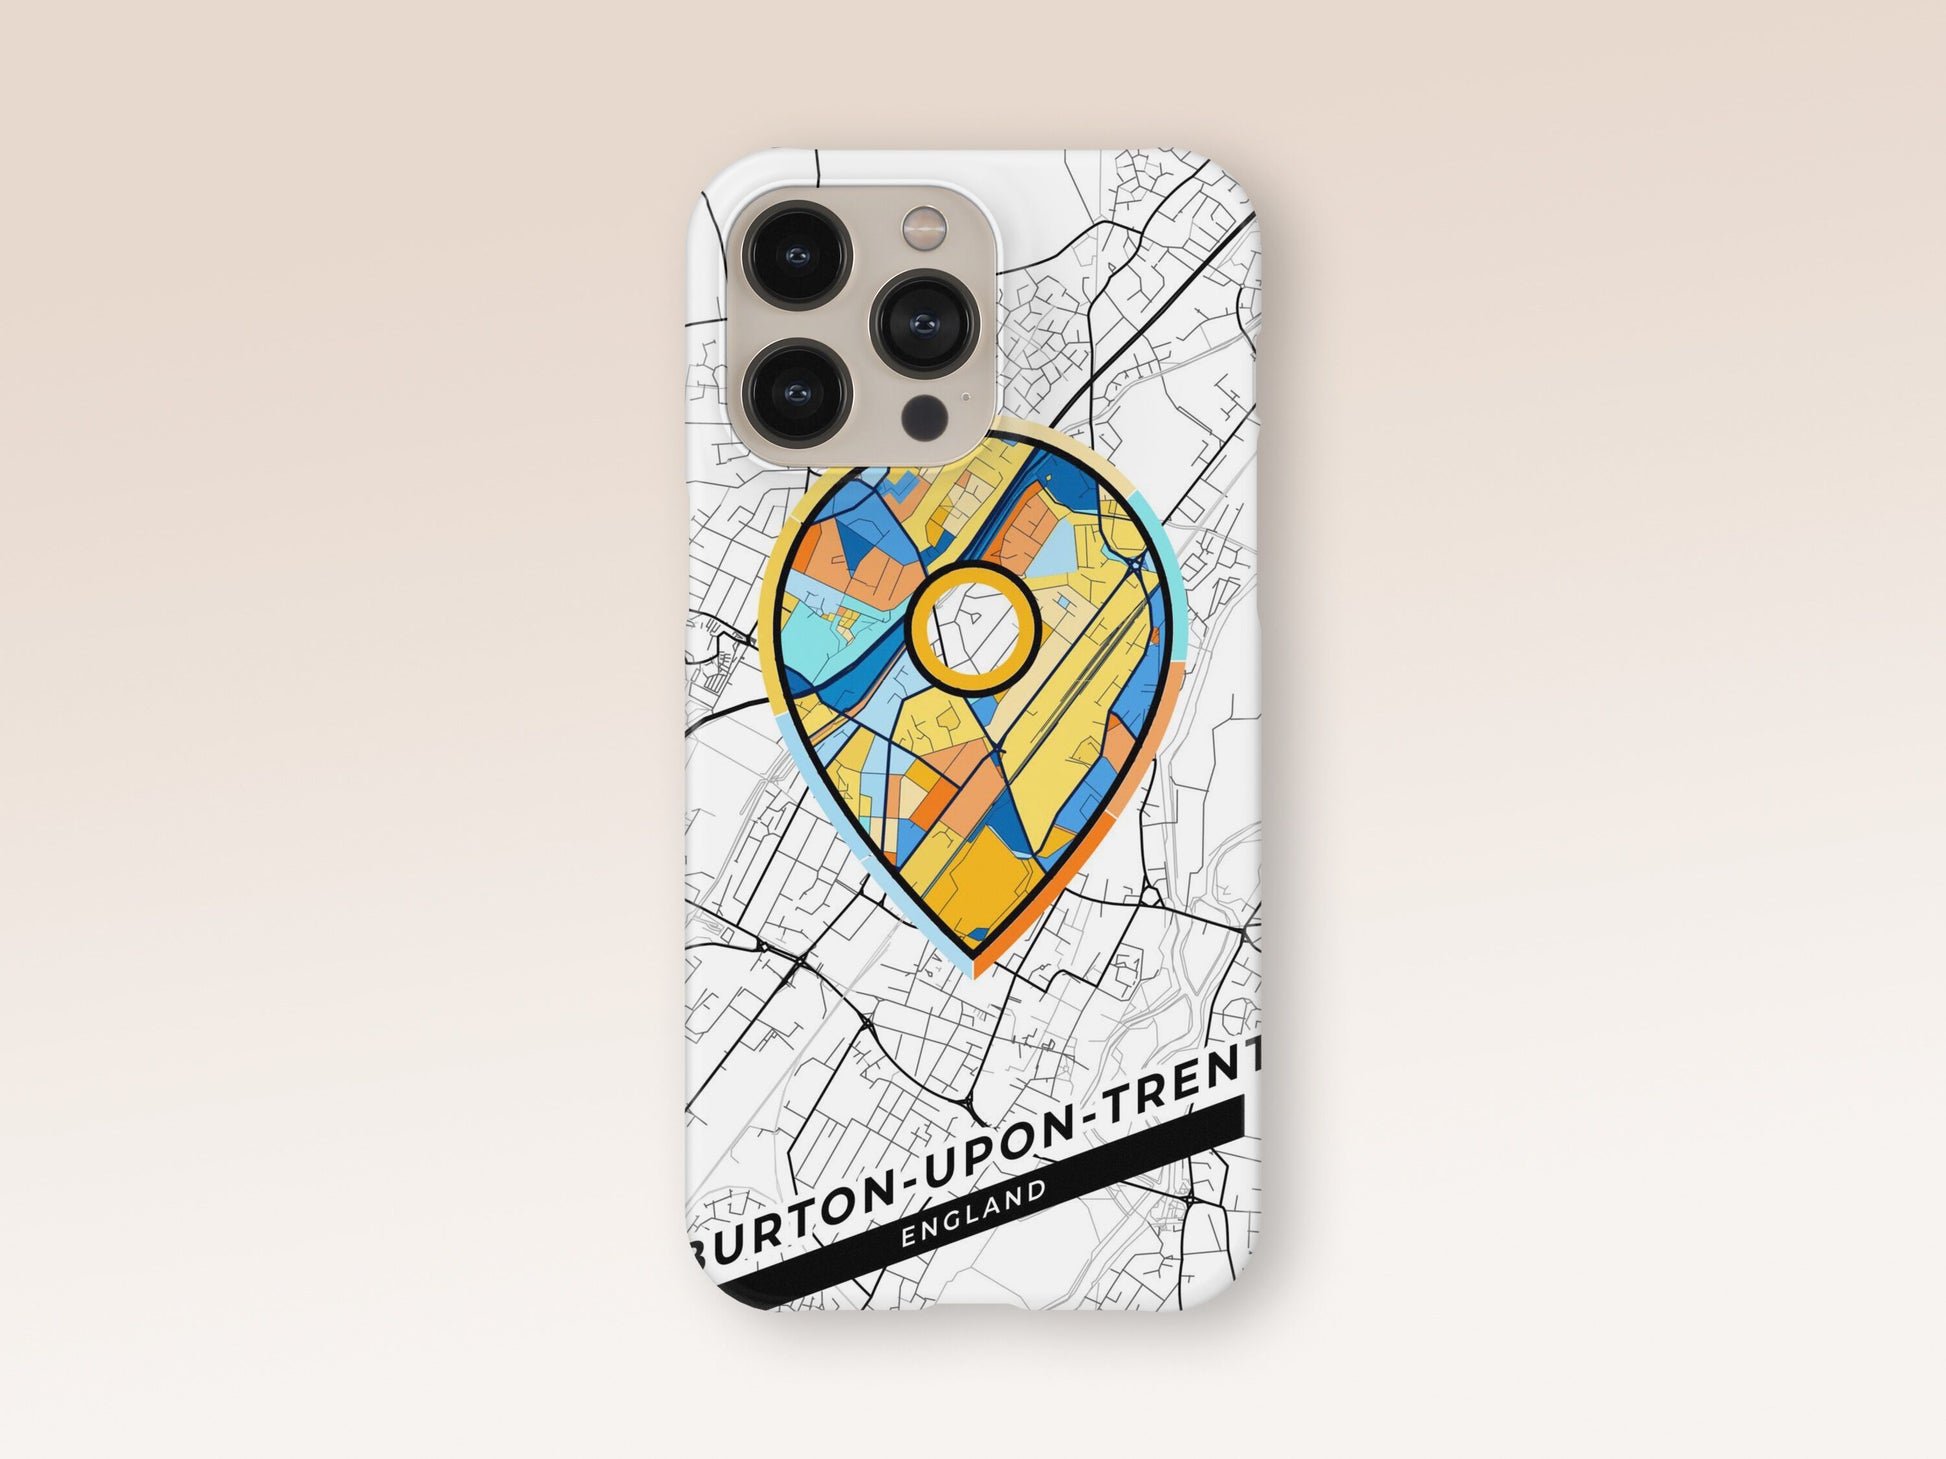 Burton-Upon-Trent England slim phone case with colorful icon. Birthday, wedding or housewarming gift. Couple match cases. 1